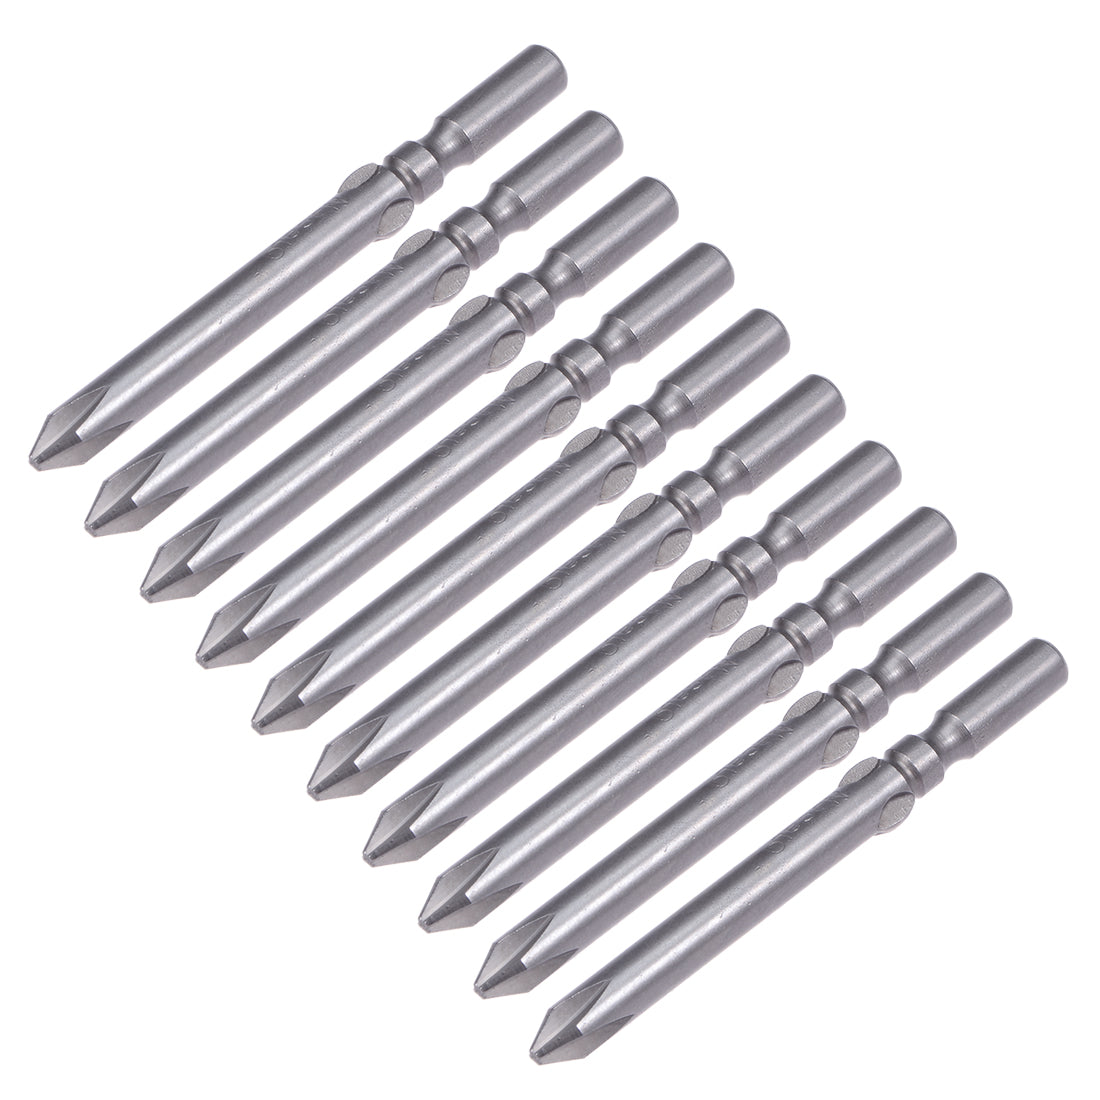 Uxcell Uxcell 10 Pcs 5mm Shank 60mm Length 3.5mm Phillips PH1 Magnetic S2 Screwdriver Bits